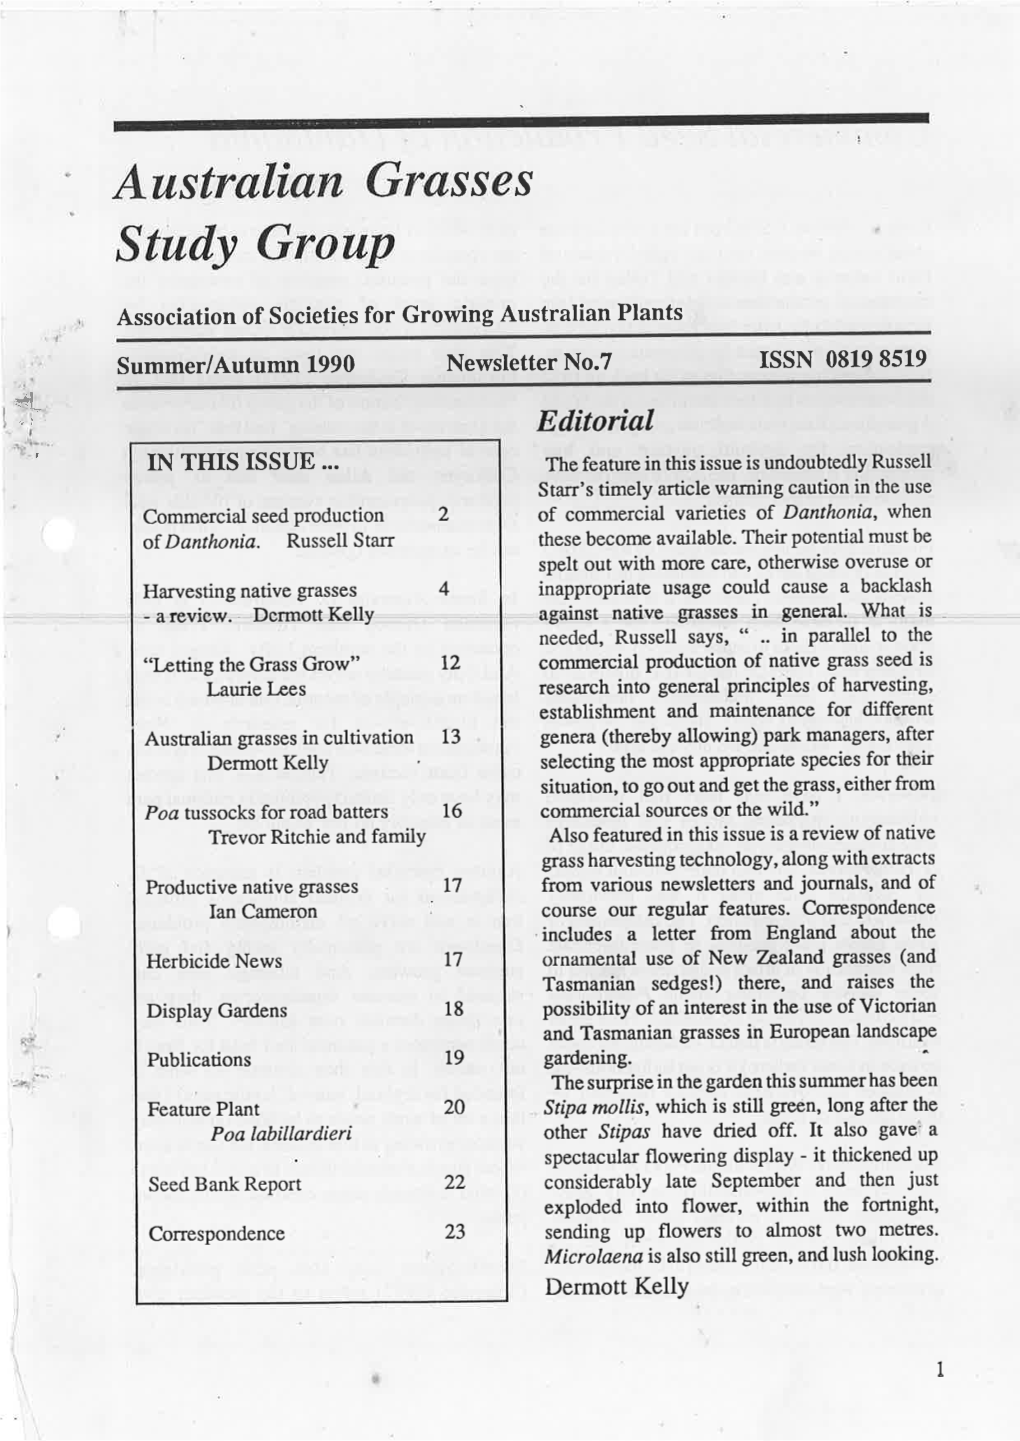 Australian Grasses Study Group -Association of Societies for Growing Australian Plants Summer/Autumn 1990 Newsletter No.7 ISSN 0819 8519 Editorial in THIS ISSUE